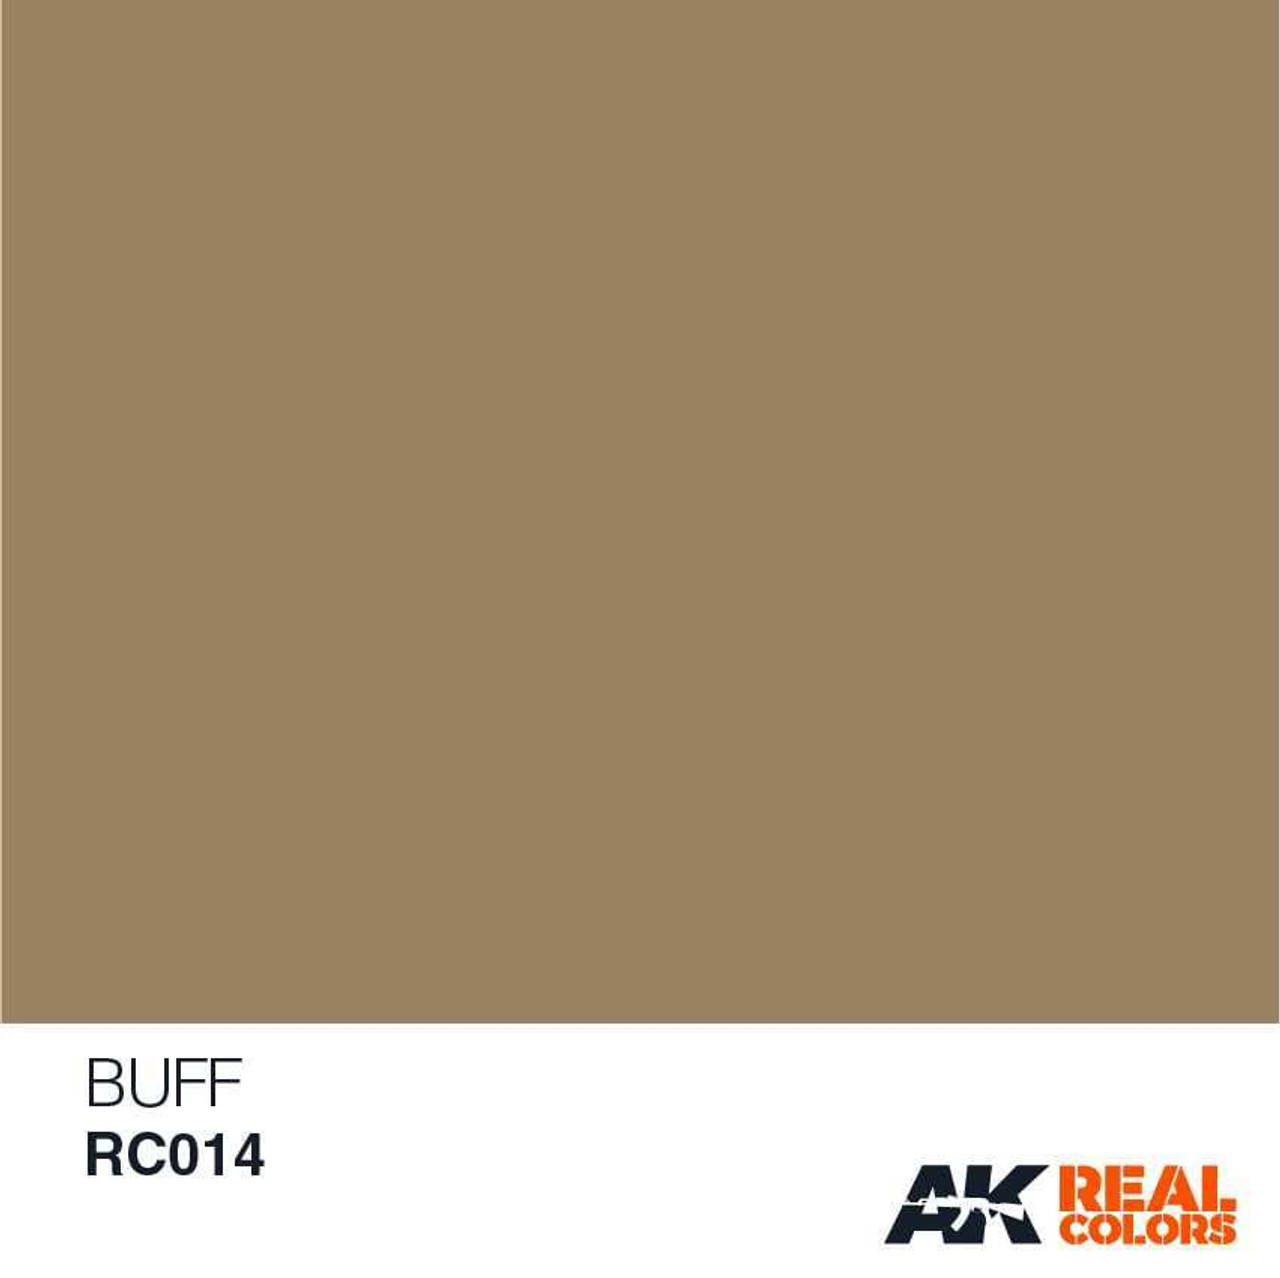 RC14 Real Colors  Buff Acrylic Lacquer Paint 10ml Bottle